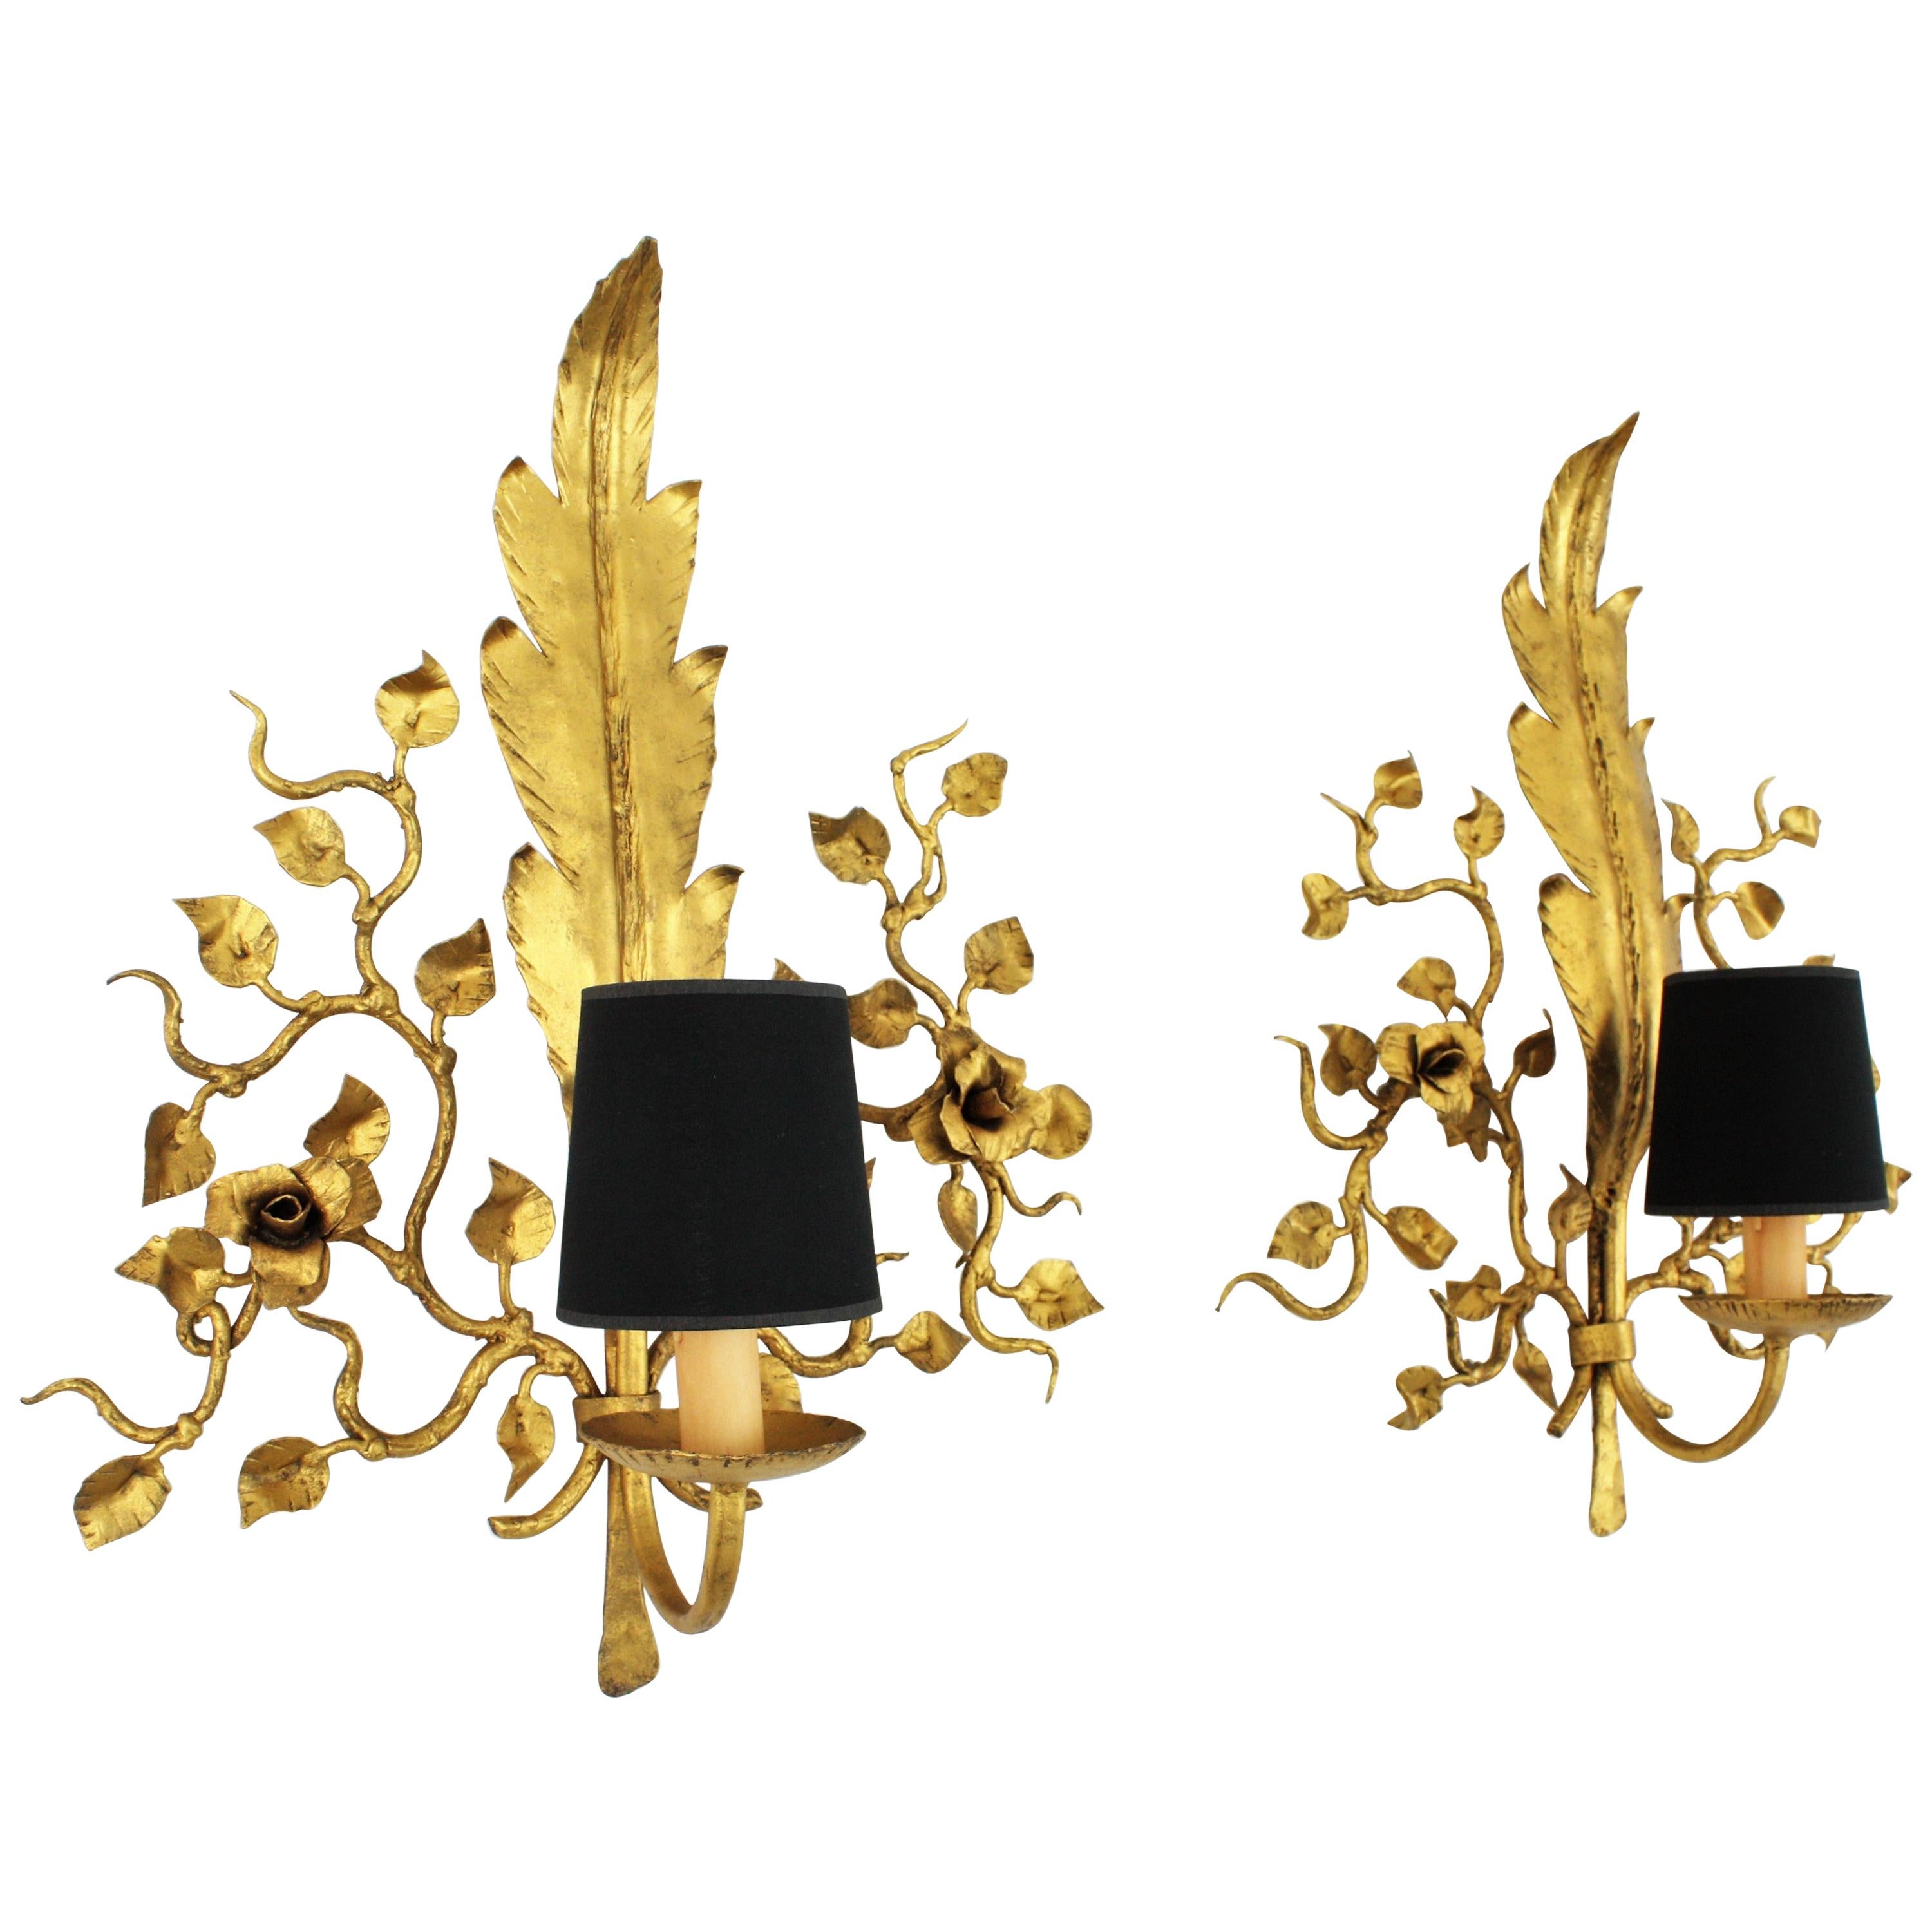 Pair of Hollywood Regency Foliage Floral Wall Sconces in Gilt Iron, 1940s